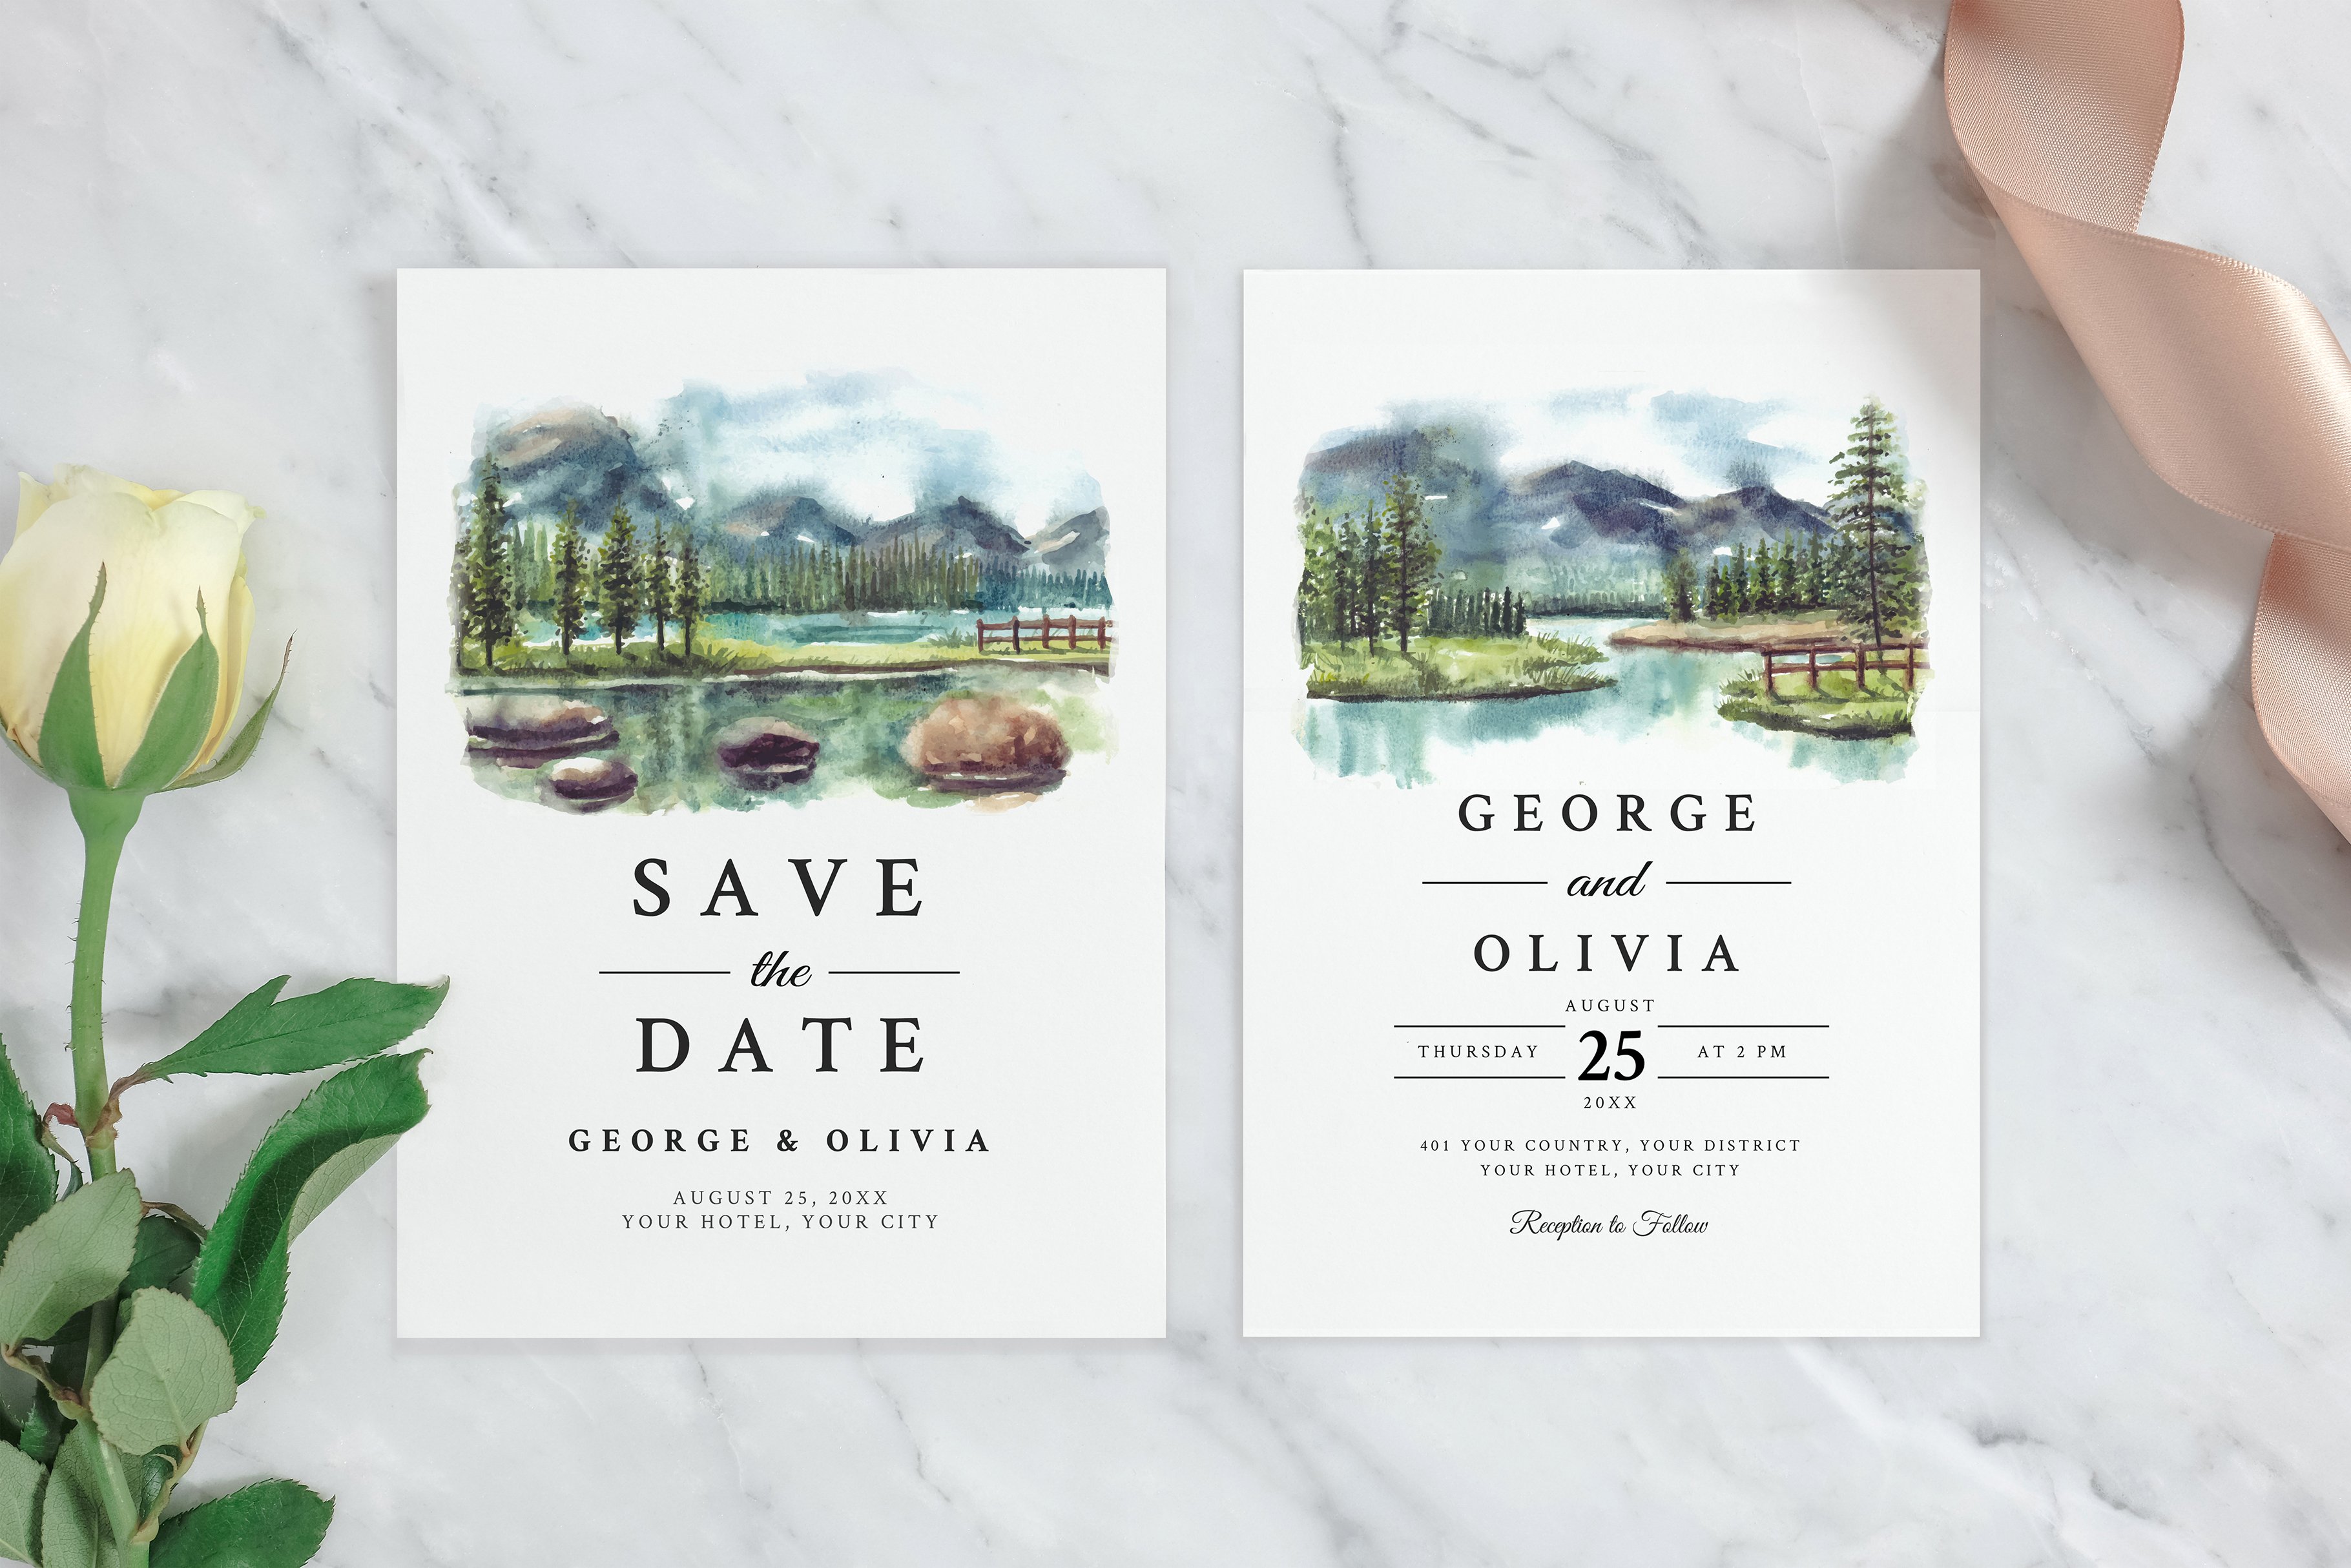 Watercolor painting of a lake and mountains is featured on the save the date.